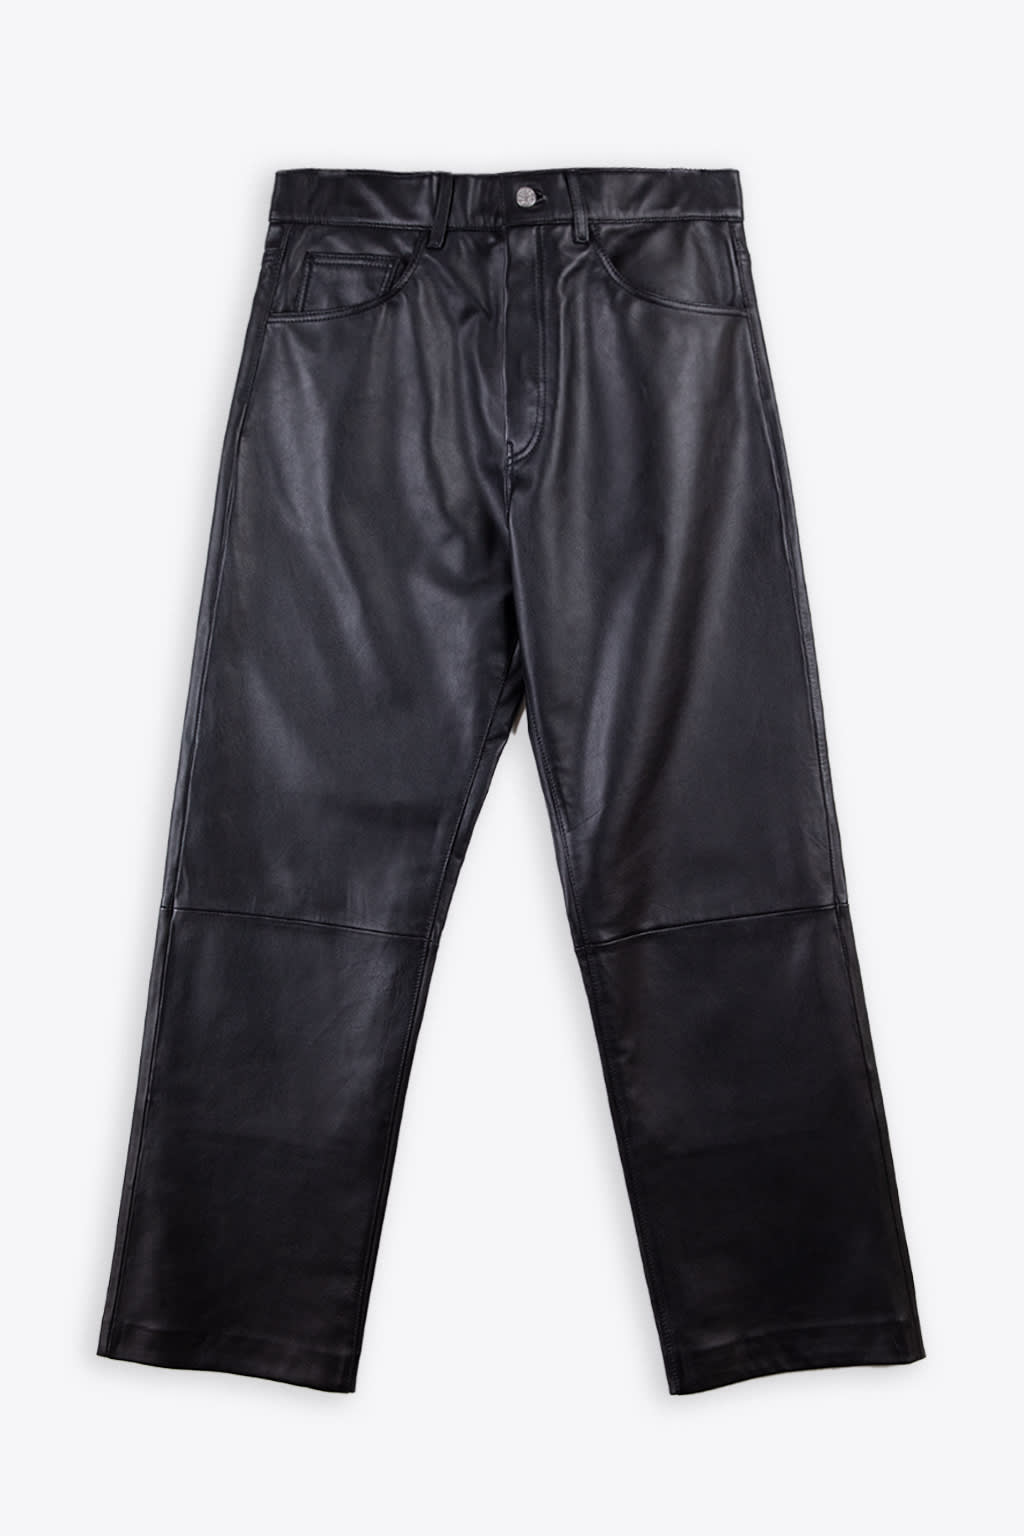 SUNFLOWER LOOSE LEATHER BLACK LEATHER LOOSE PANT - LOOSE LEATHER PANT